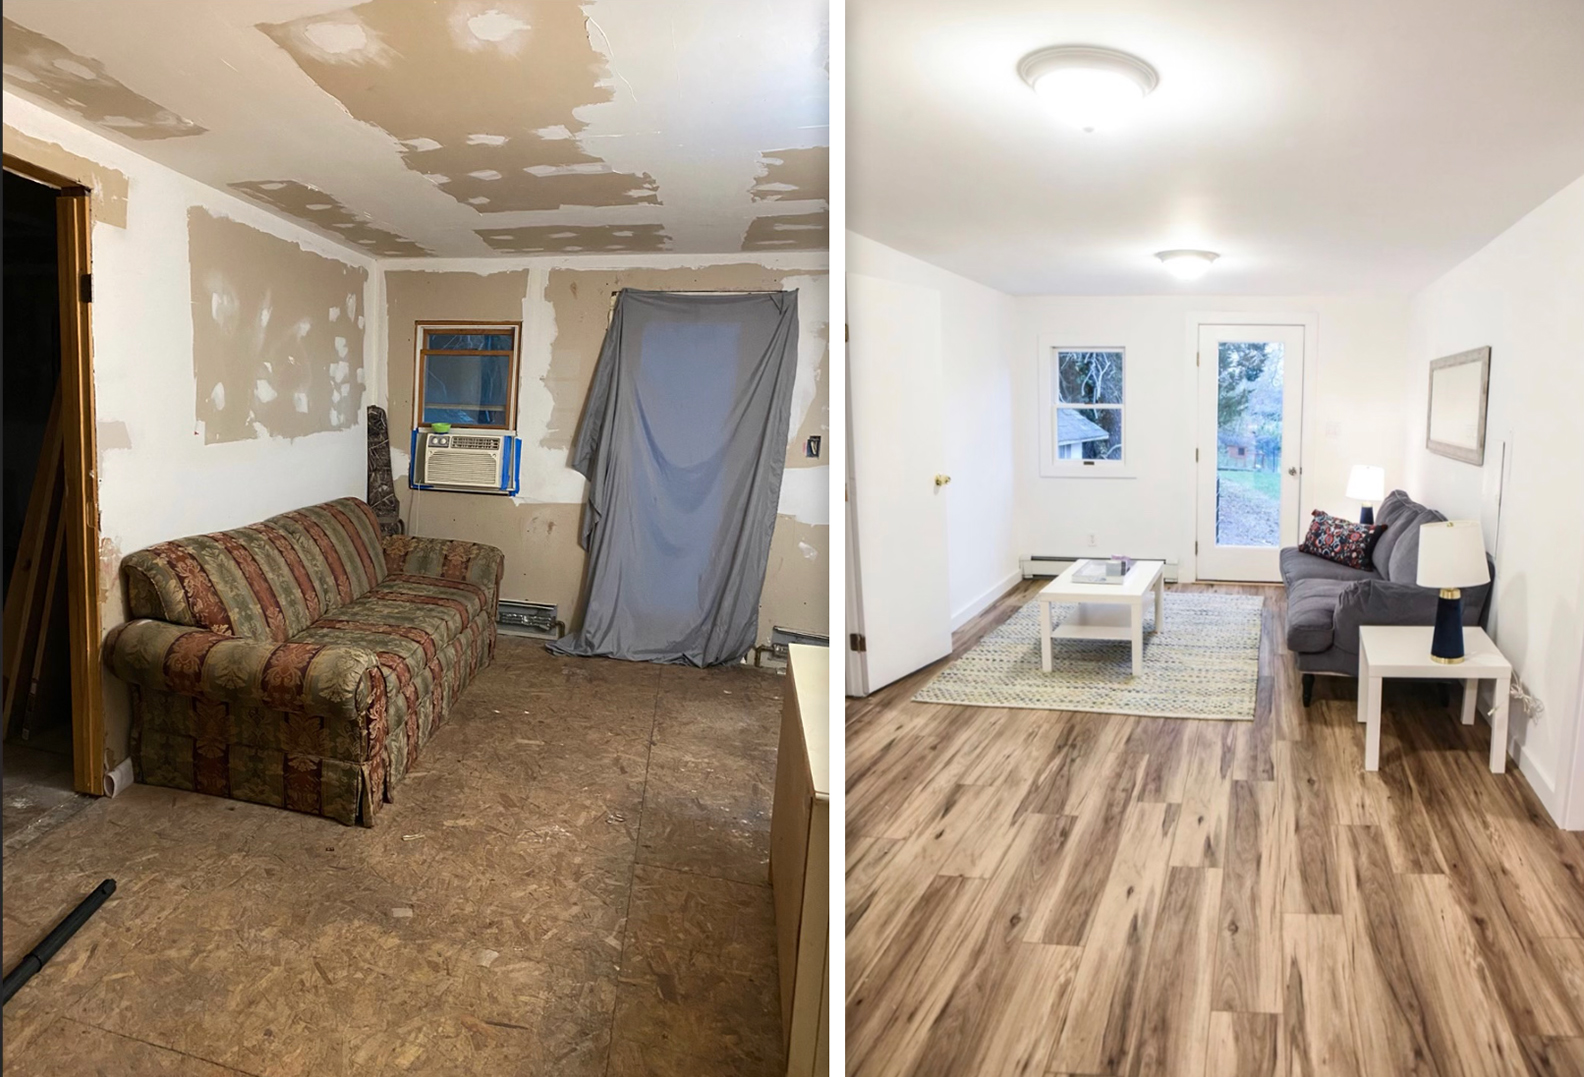 Before and after photos of a house repaired by Hamptons Community Outreach